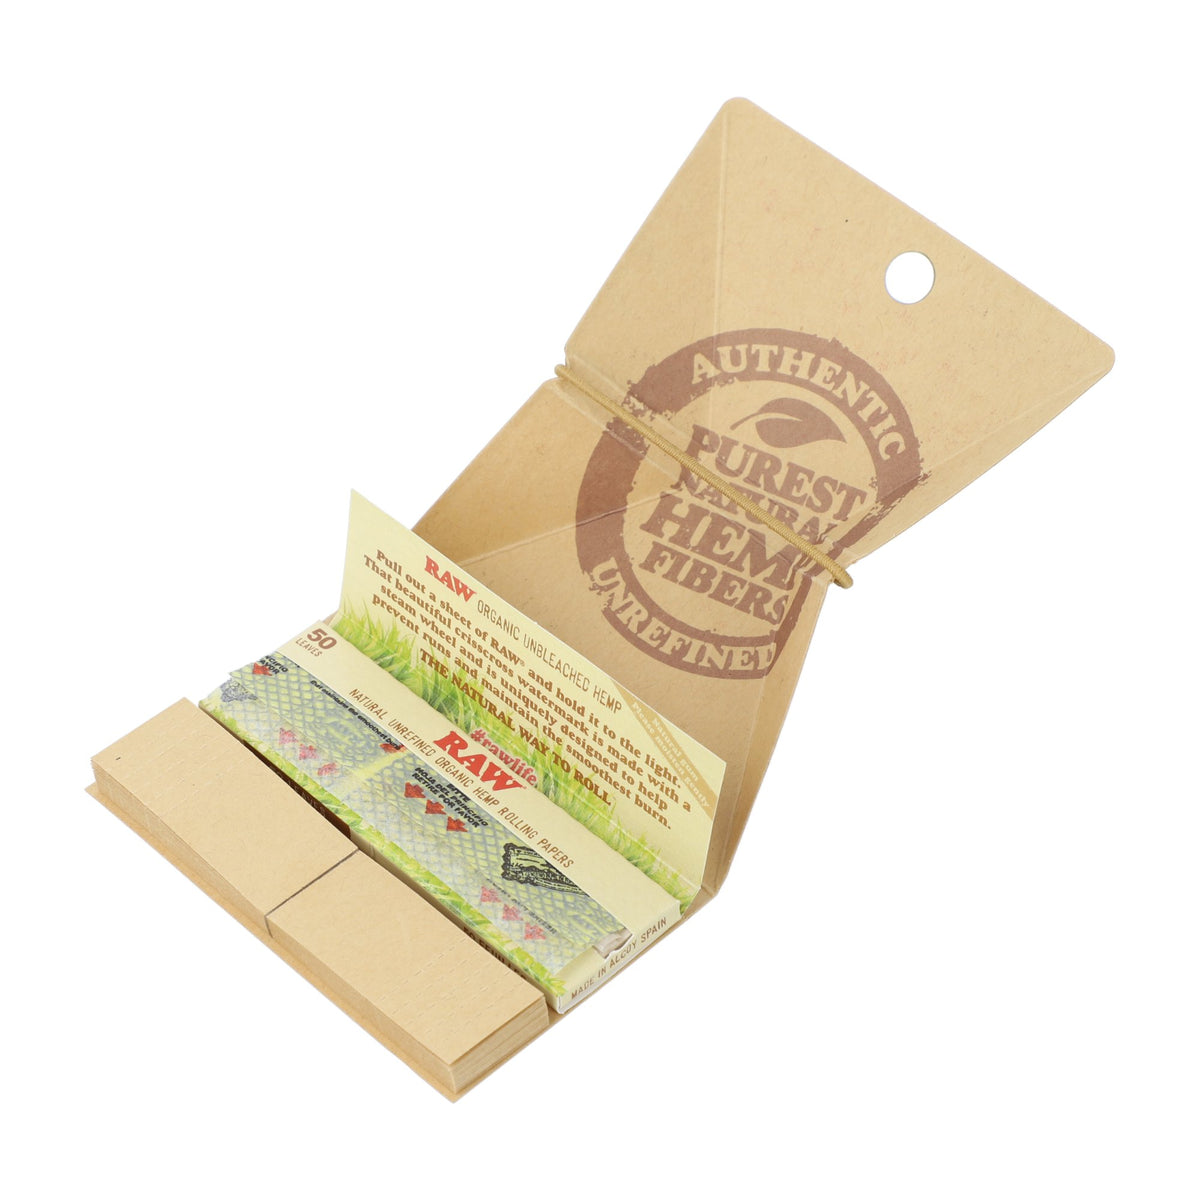 RAW Organic Hemp Artesano 1 1/4 Rolling Papers Rolling Papers esd-official